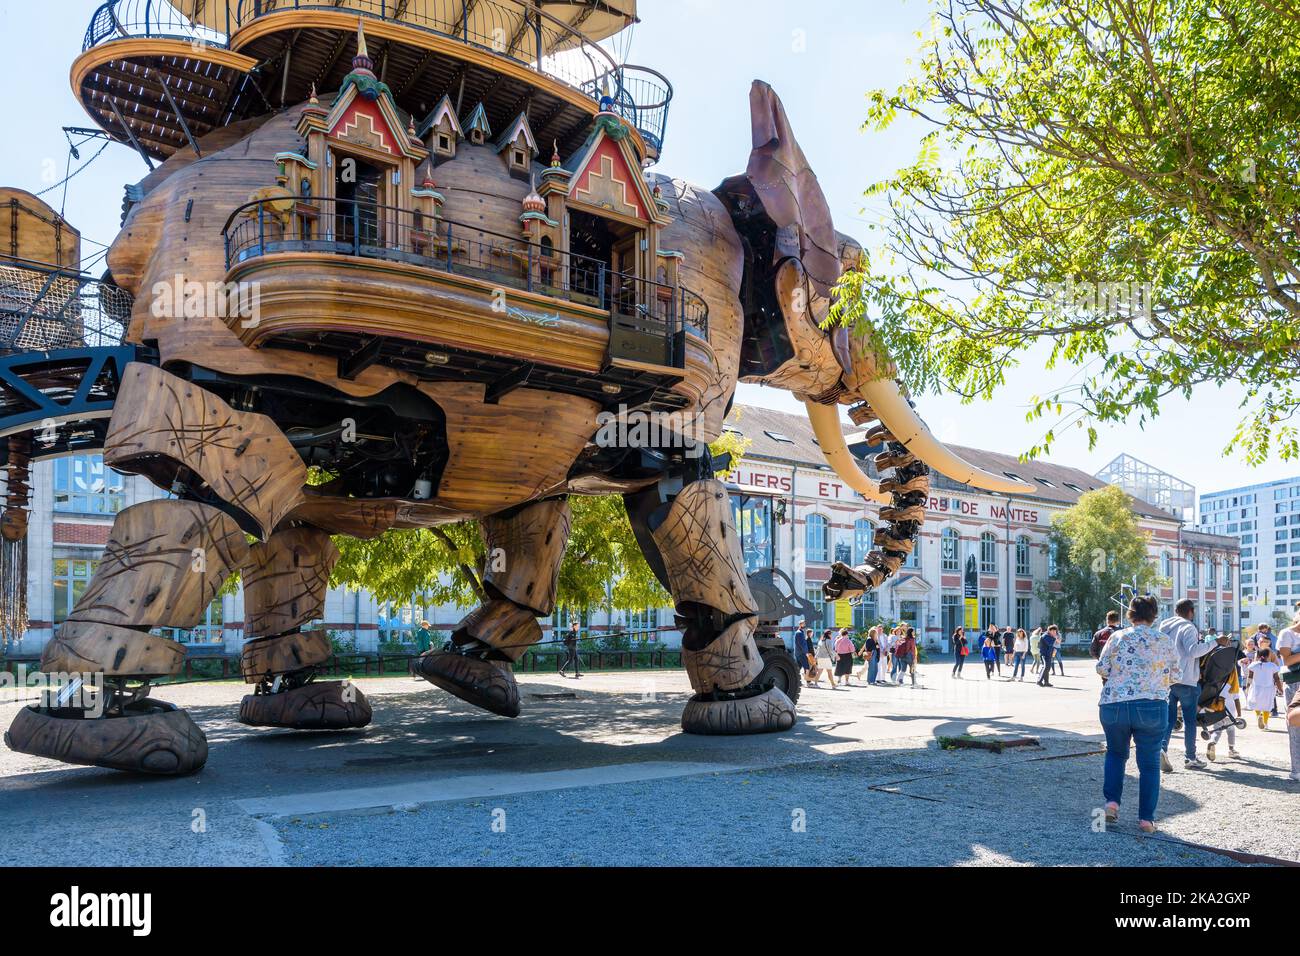 The Great Elephant giant puppet, part of the Machines of the Isle of Nantes tourist attraction, wanders amid onlookers along the shipyards building. Stock Photo